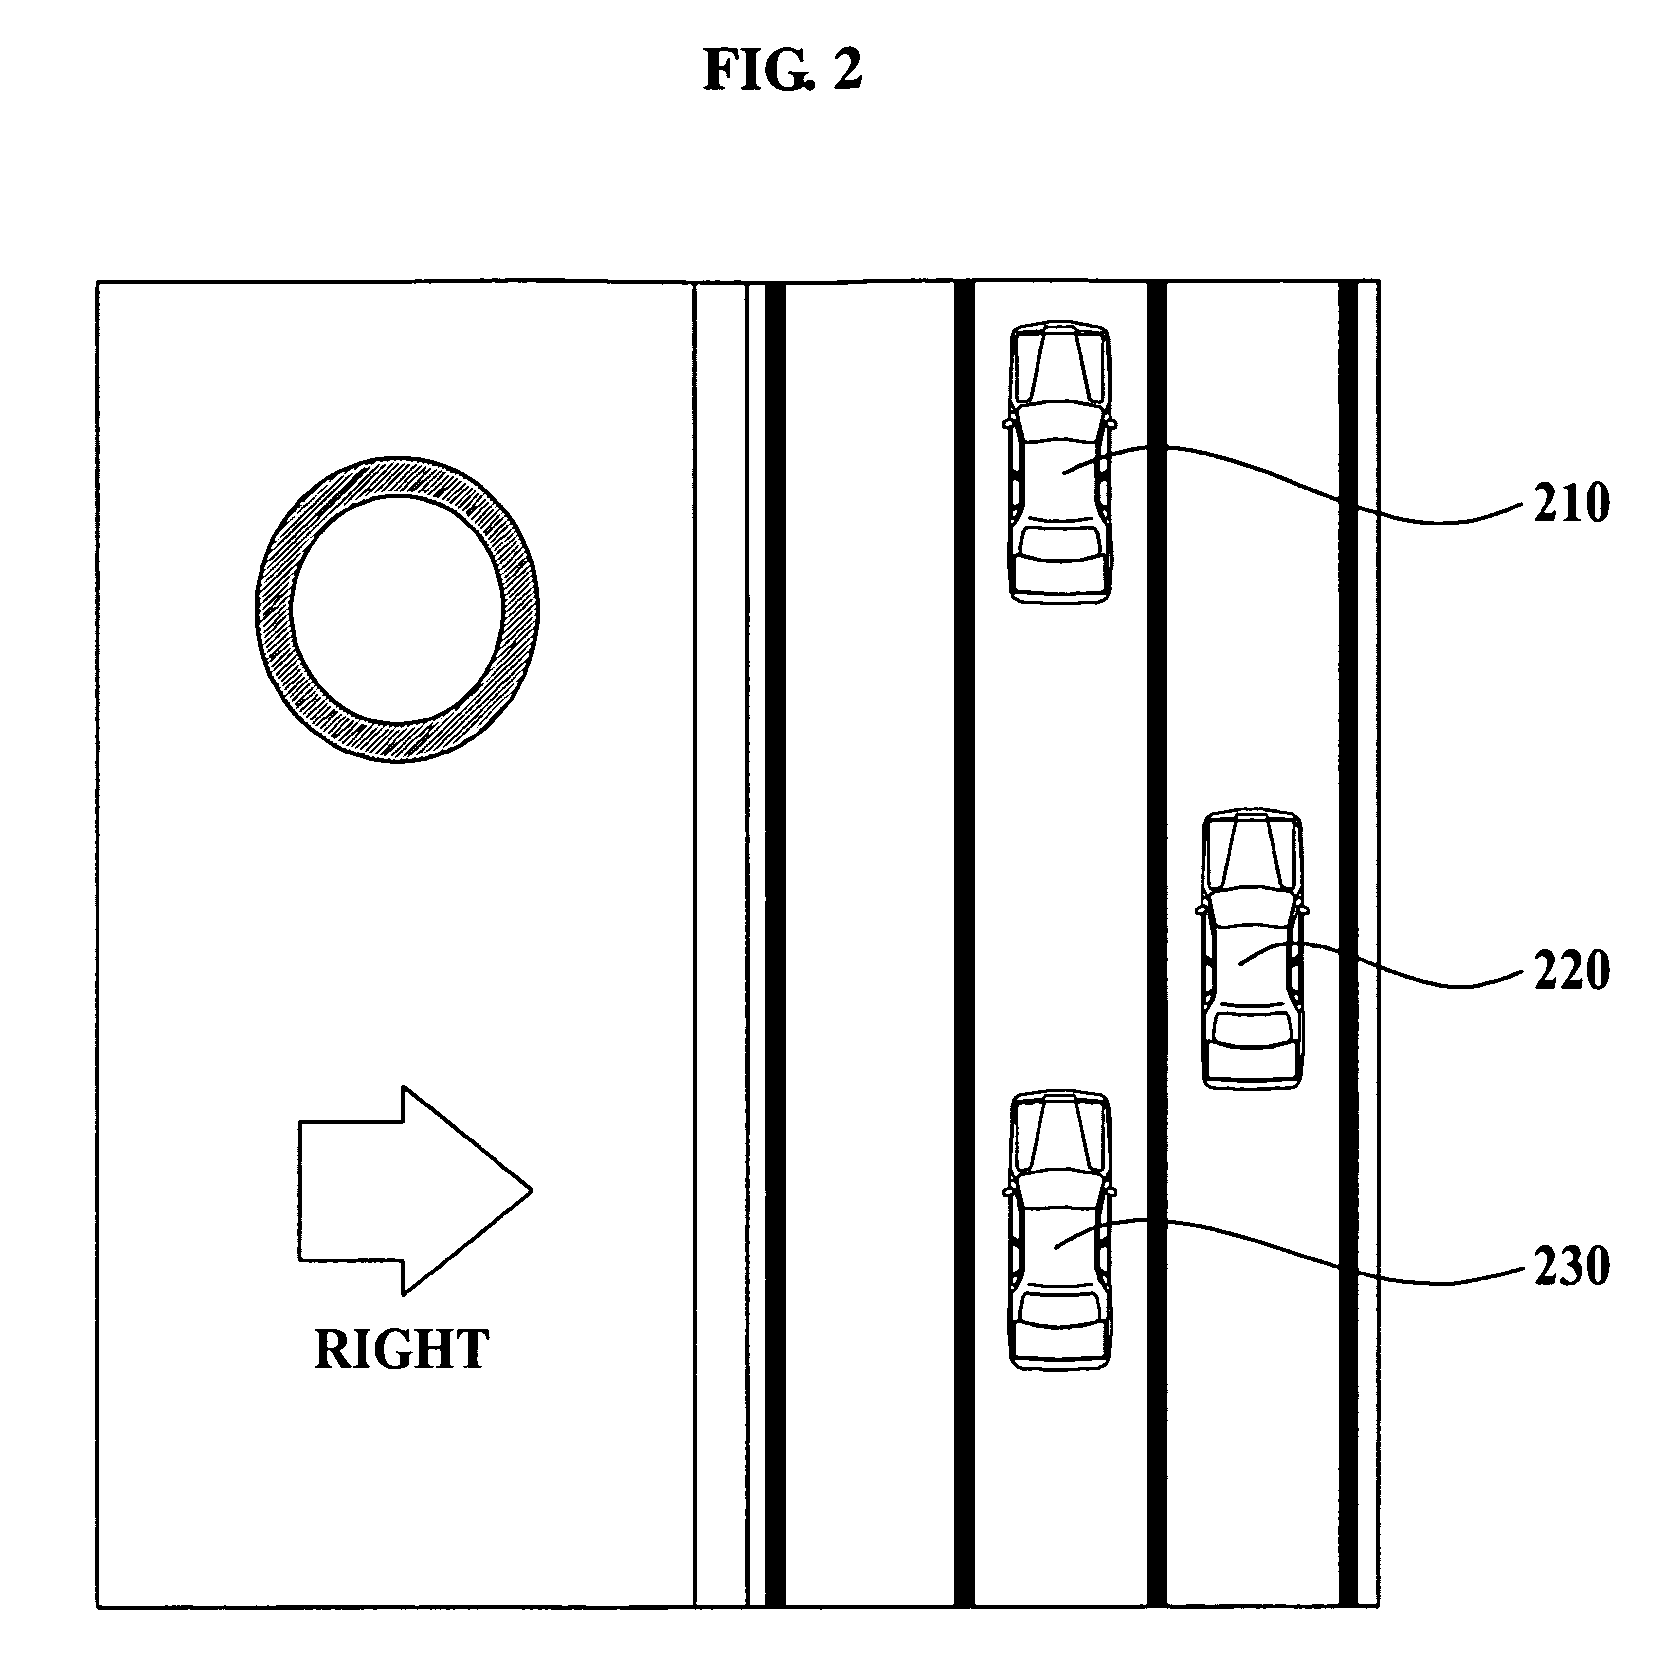 Method and apparatus for alerting about driving state of vehicle